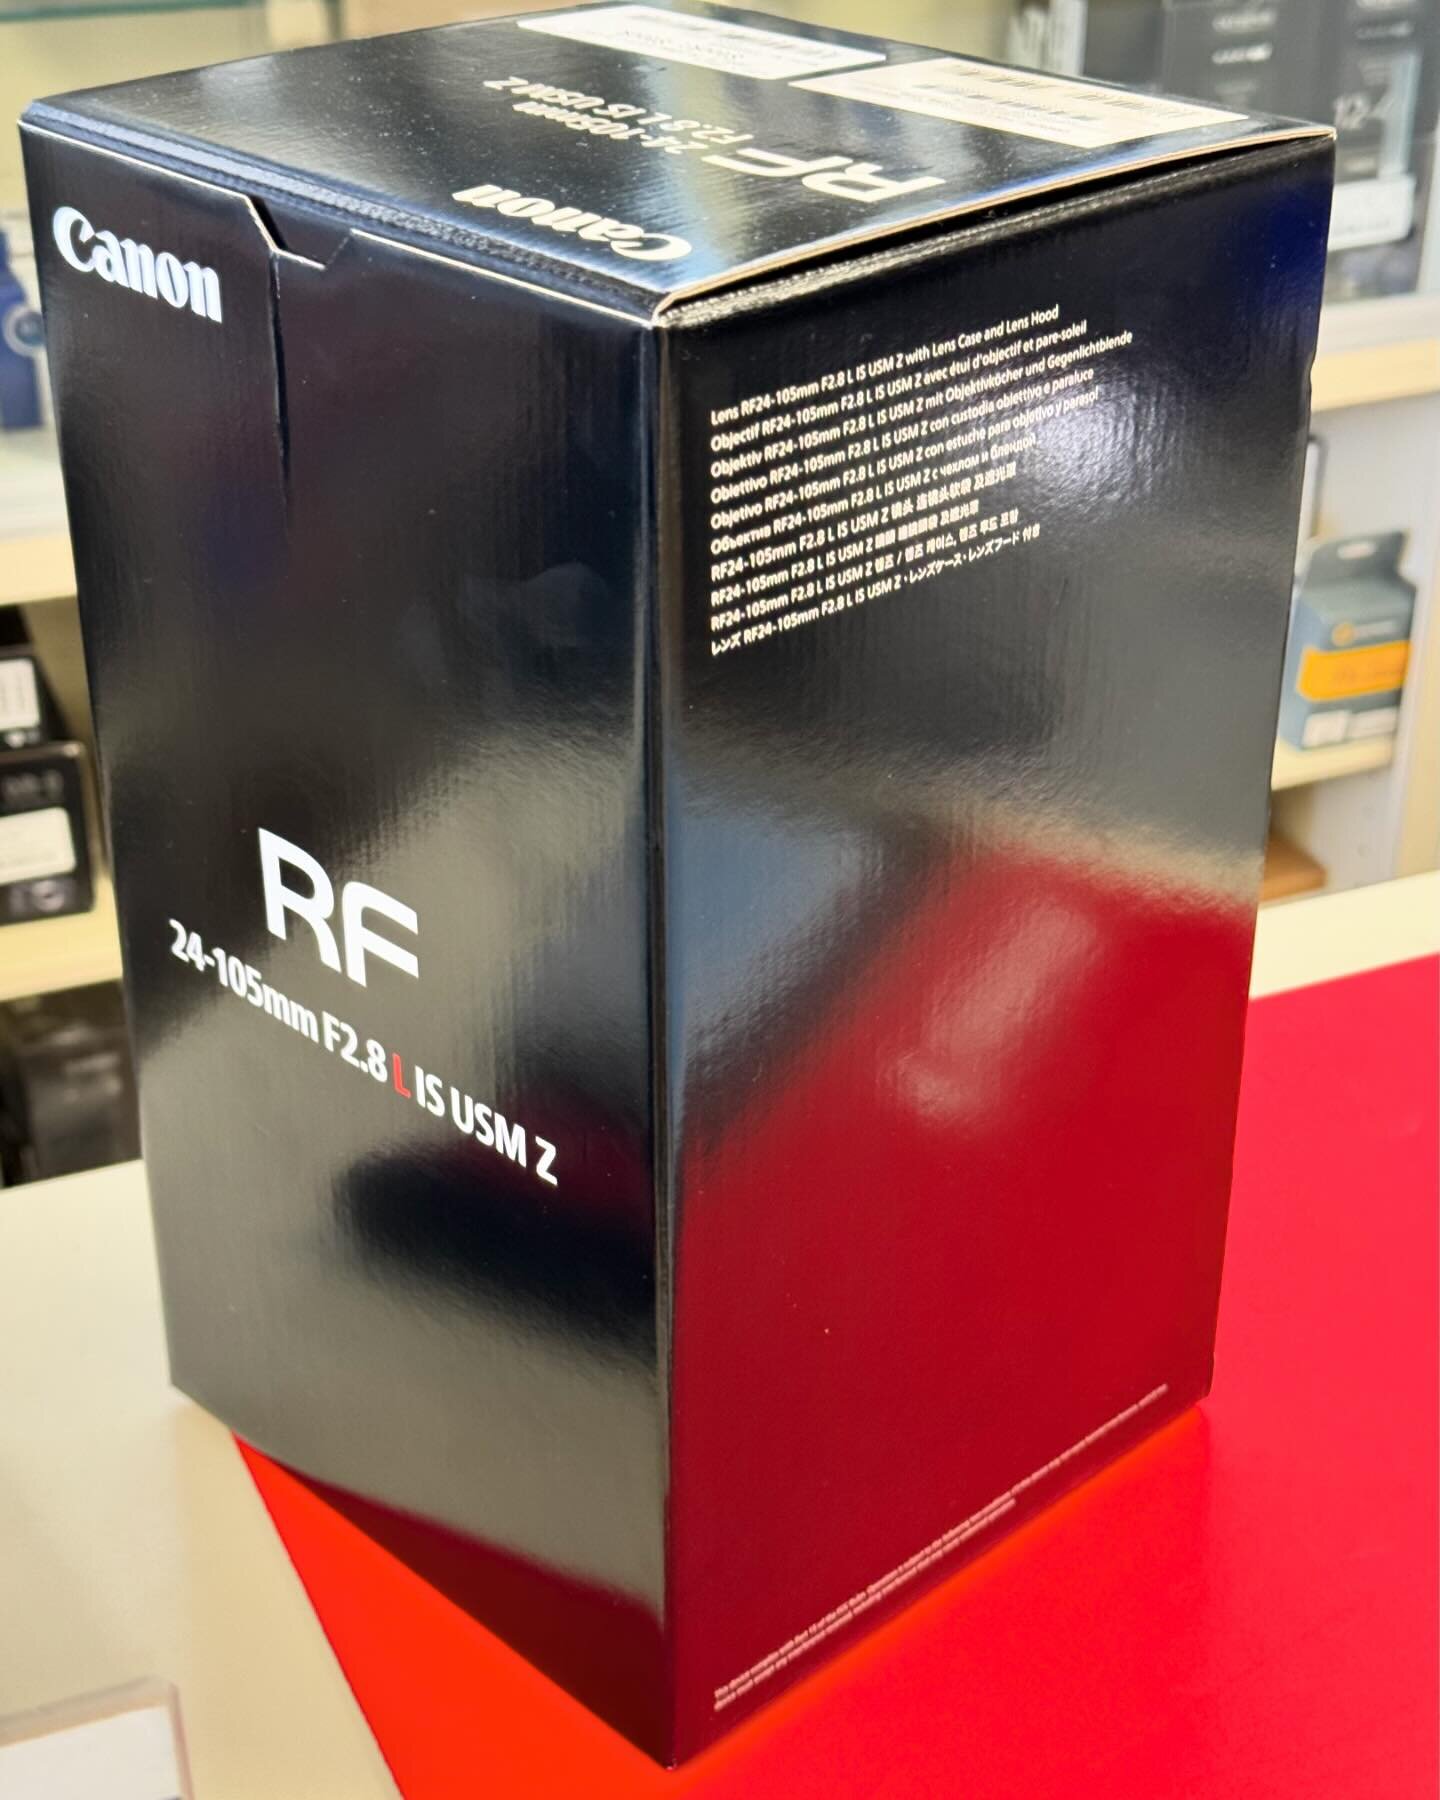 Finally got my hands on the #Canon #RF 24-105 2.8L IS USM Z #lens thanks to #AllensCamera! Excited to test it out! 

#lenses #camera #canon24105 #lseries #zoomlens #zoom #photography #cinematography #photographer #canonrf #eosr #eosr5 #eosr5c #cinema